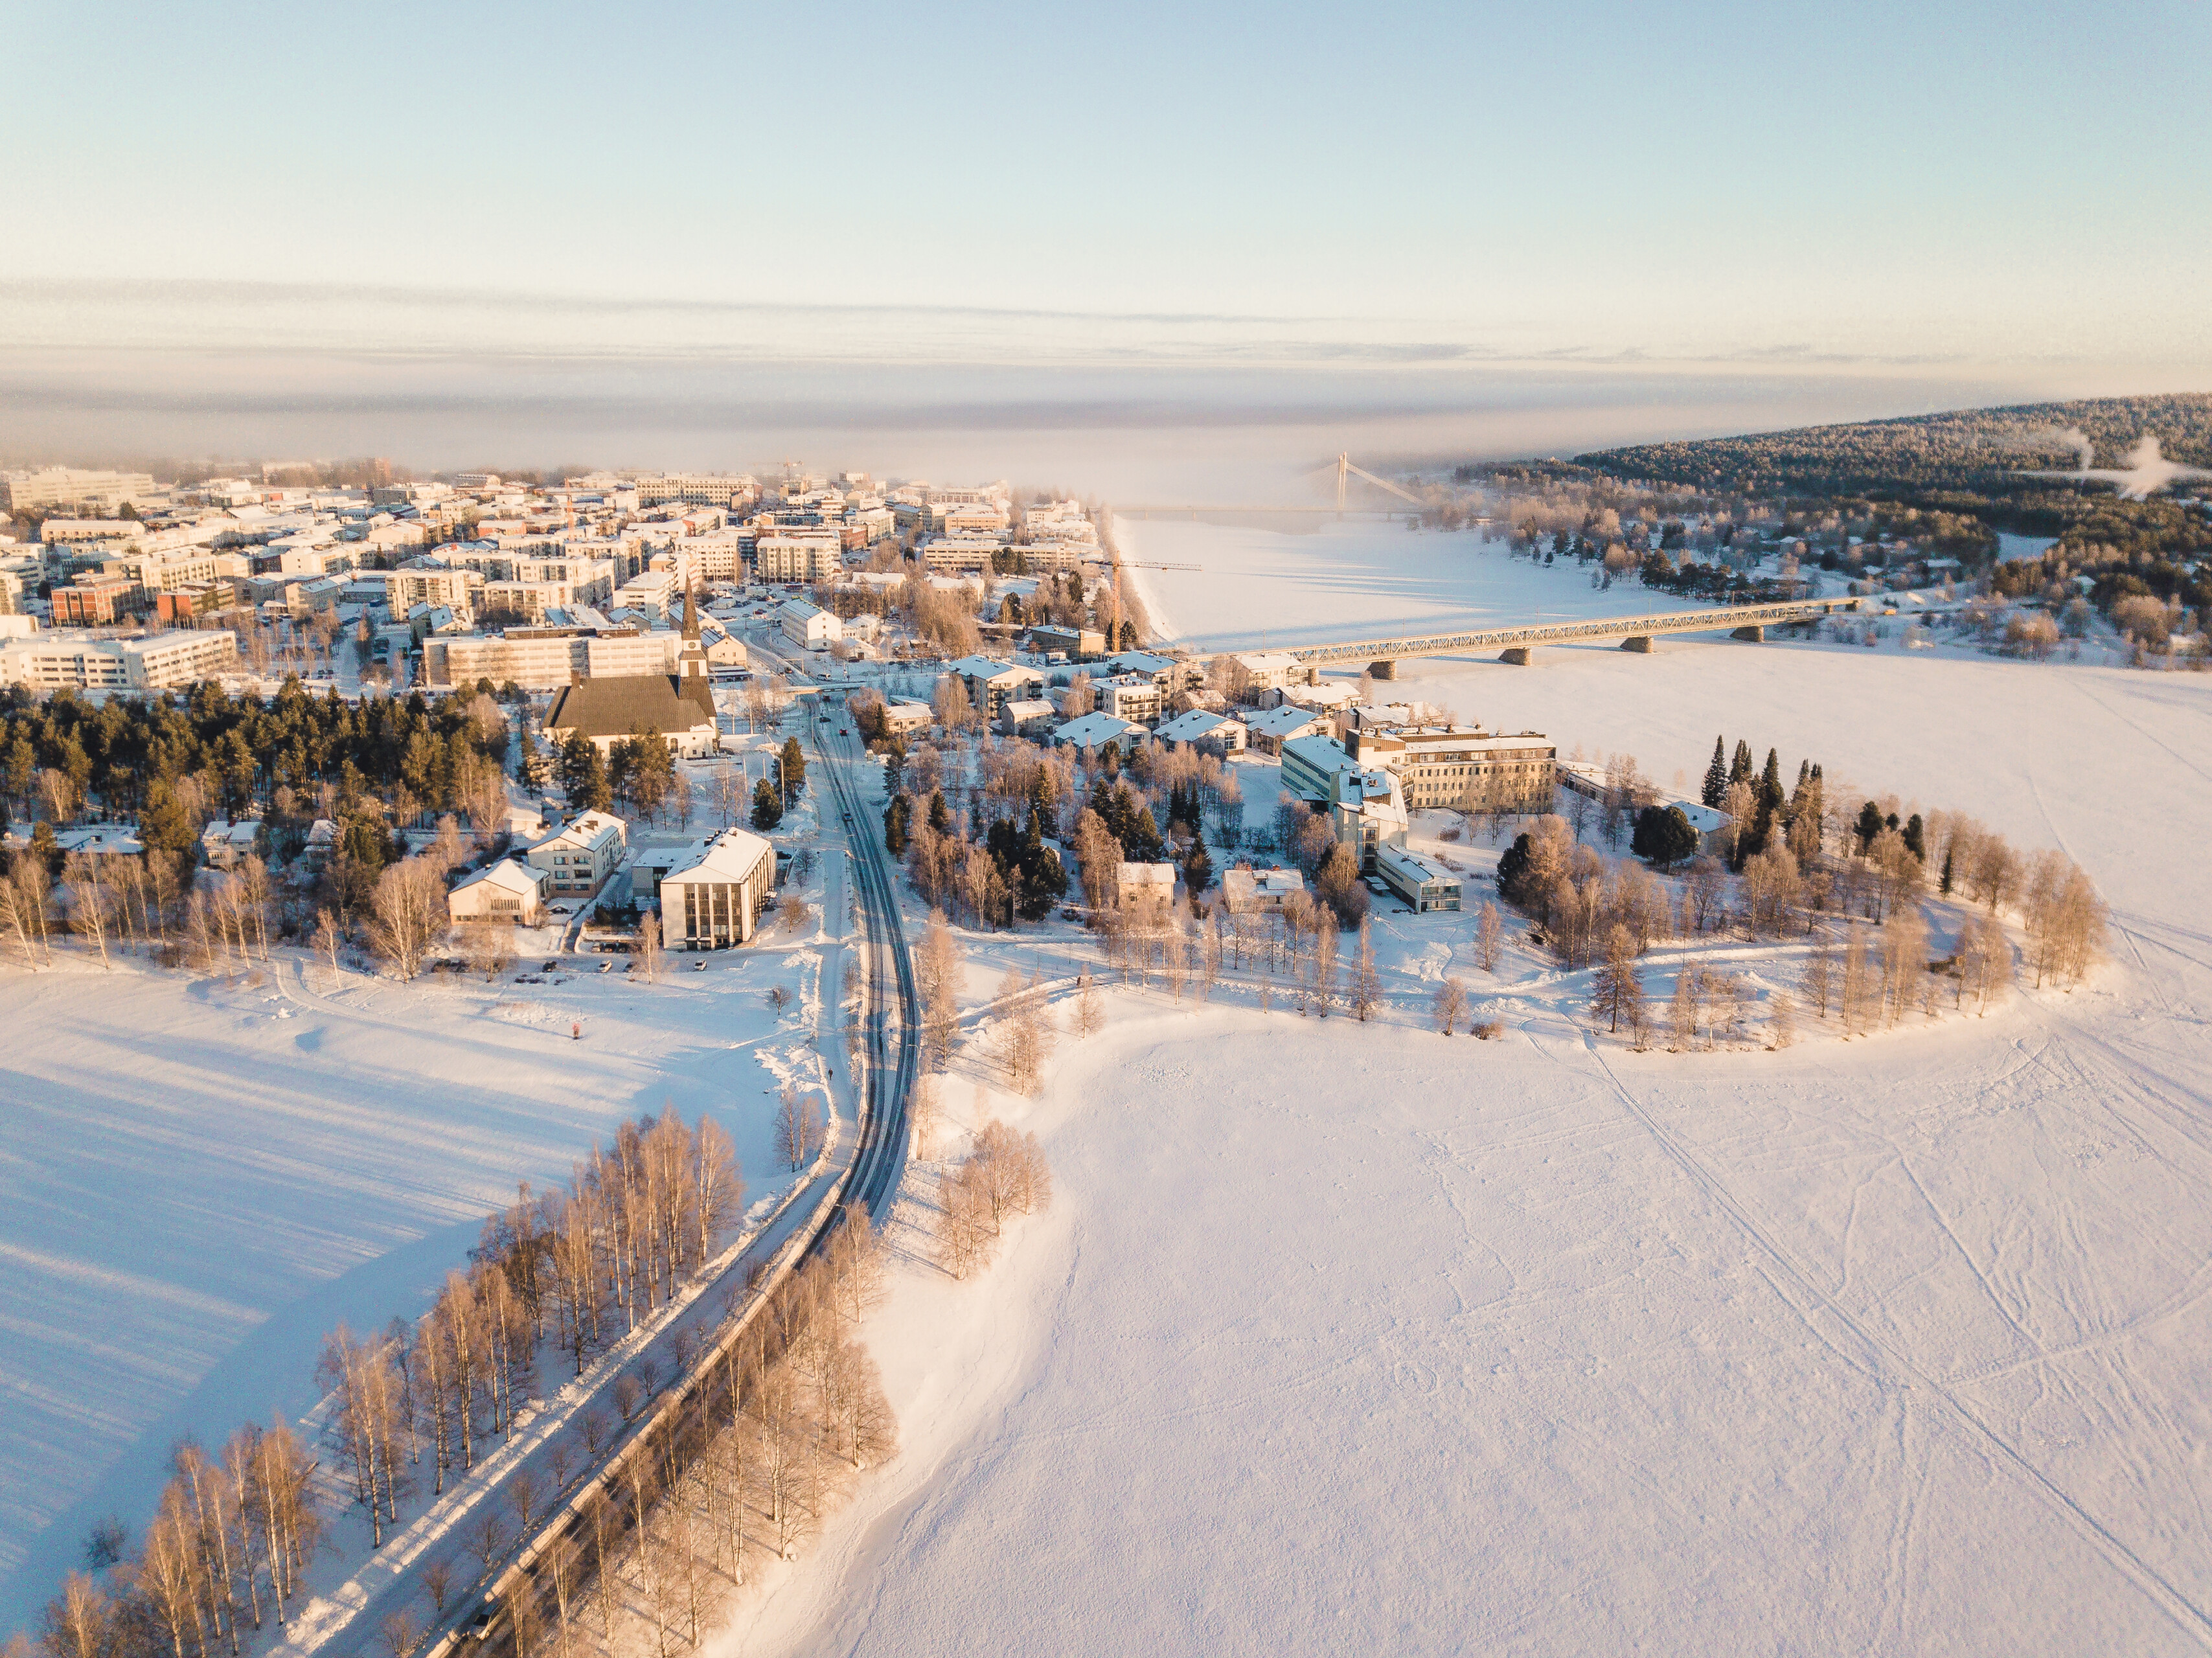 Rovaniemi city pictured from above in winter scenery with snow and ice. Rovaniemi, Lapland, Finland.